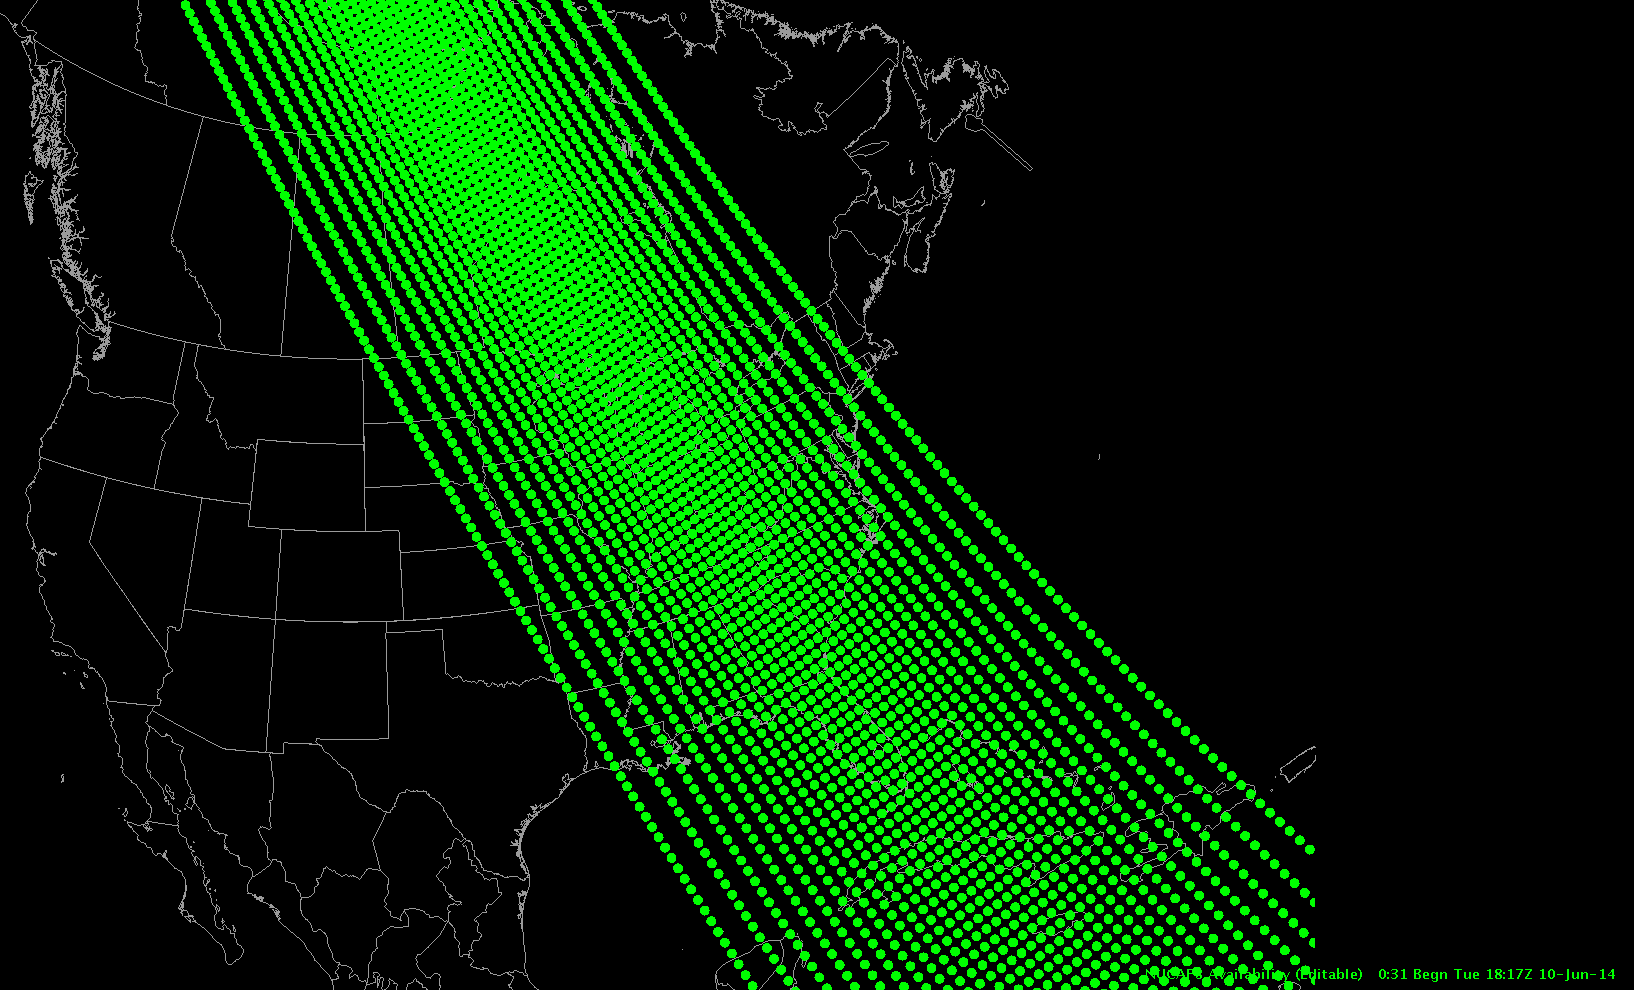 Suomi/NPP VIIRS 11.45 µm IR channel and NUCAPS sounding points (click to enlarge)